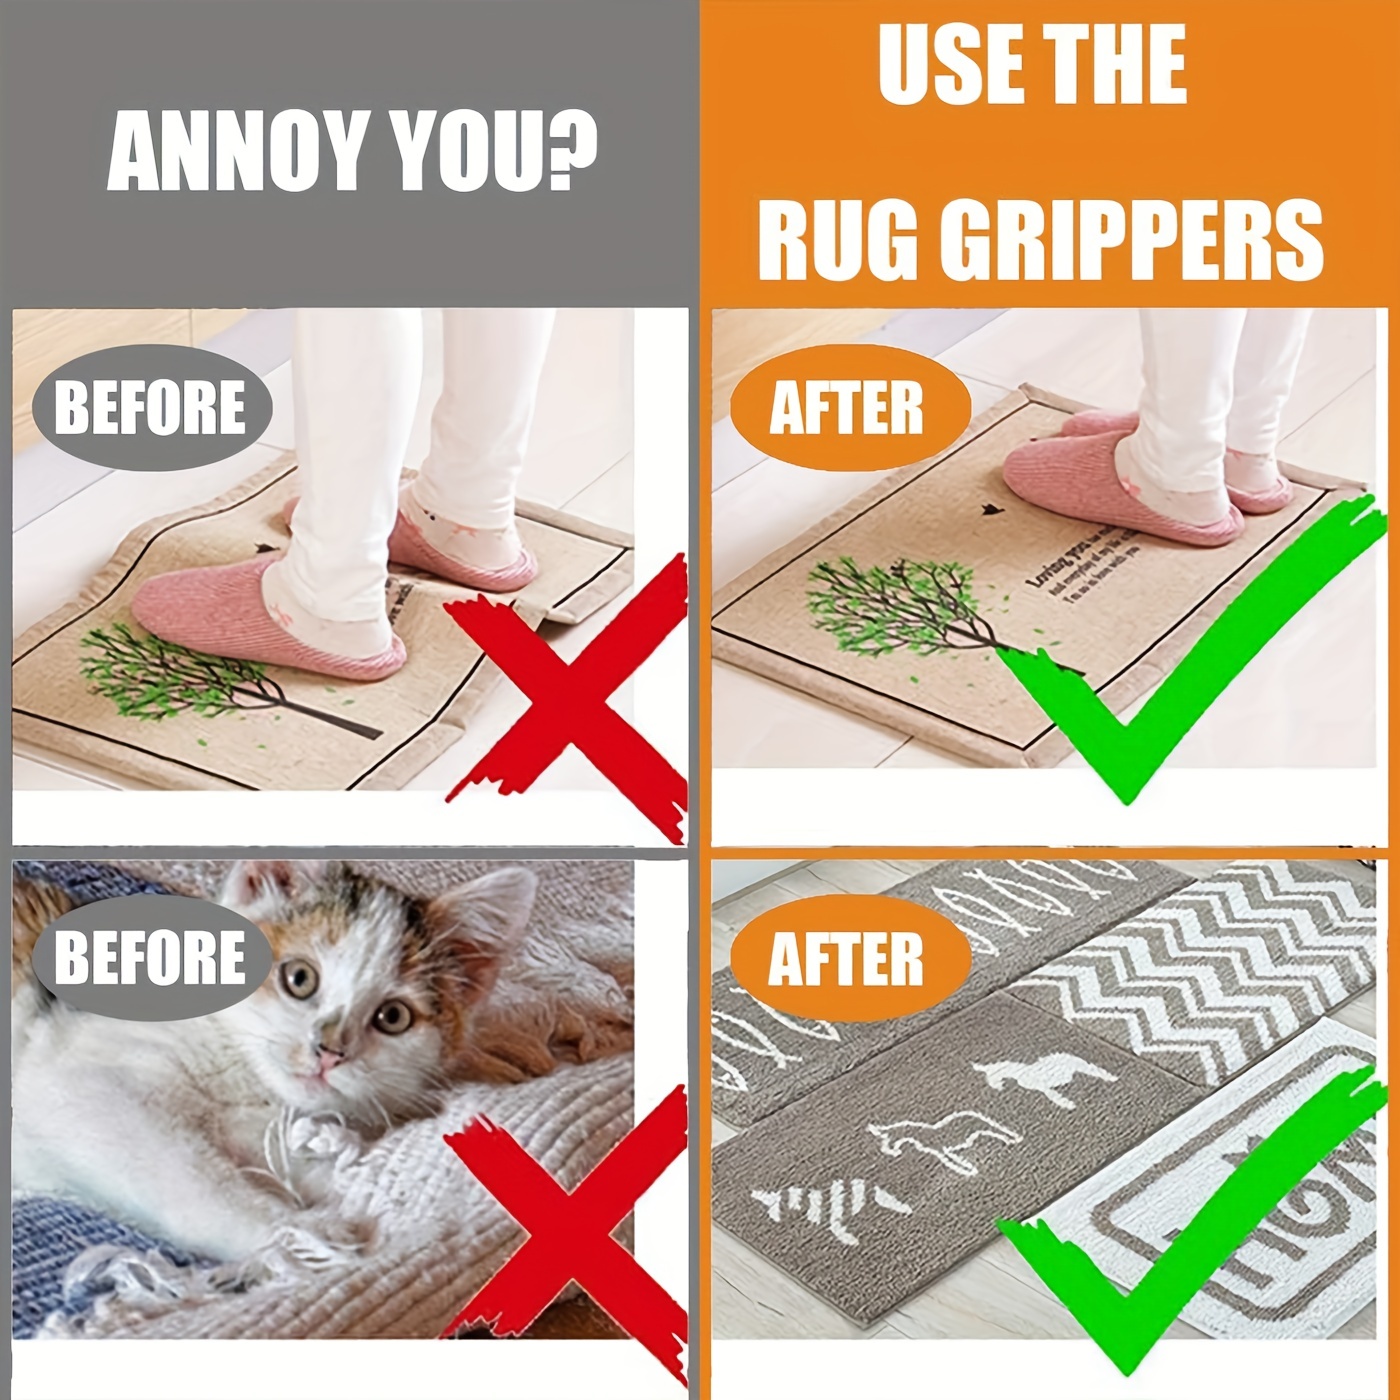 Anti Curling Rug Gripper for Carpet - Will Hold Carpets in Place and Corners Flat - Non Slip Sticky Renewable Grippers for Hardwood Floors and Tile 